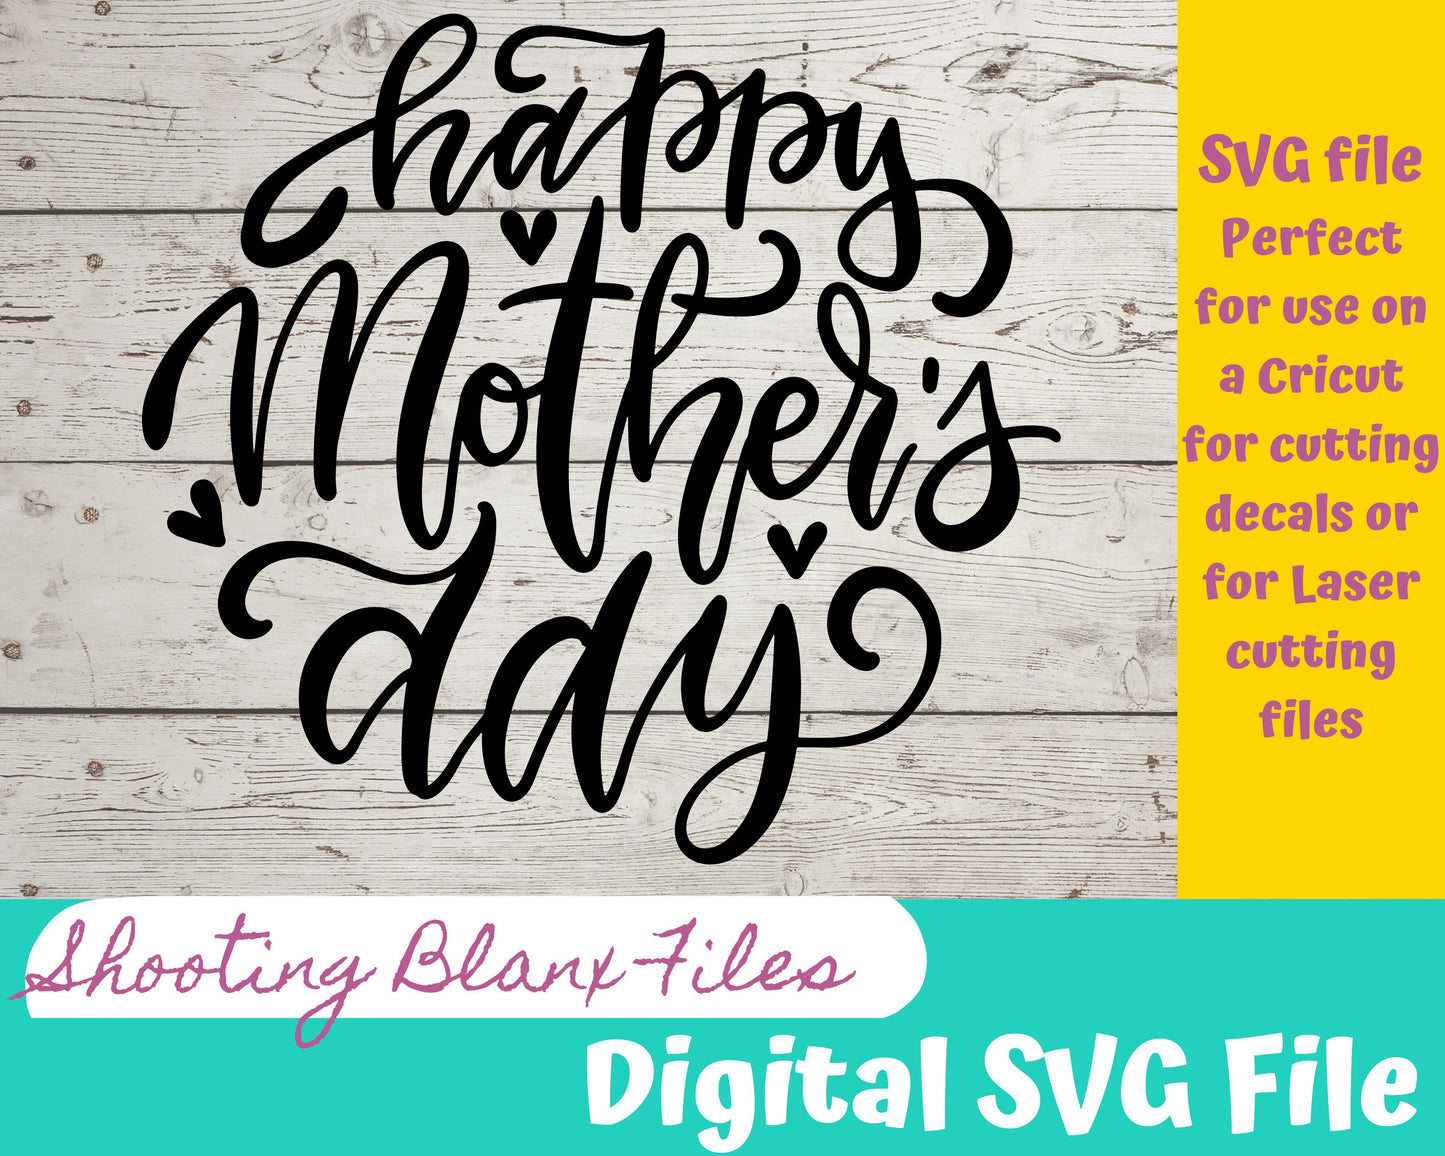 Mother’s Day quote bundle SVG file perfect for Cricut, Cameo, or Silhouette also great for laser engraving Glowforge , Mom, Mother